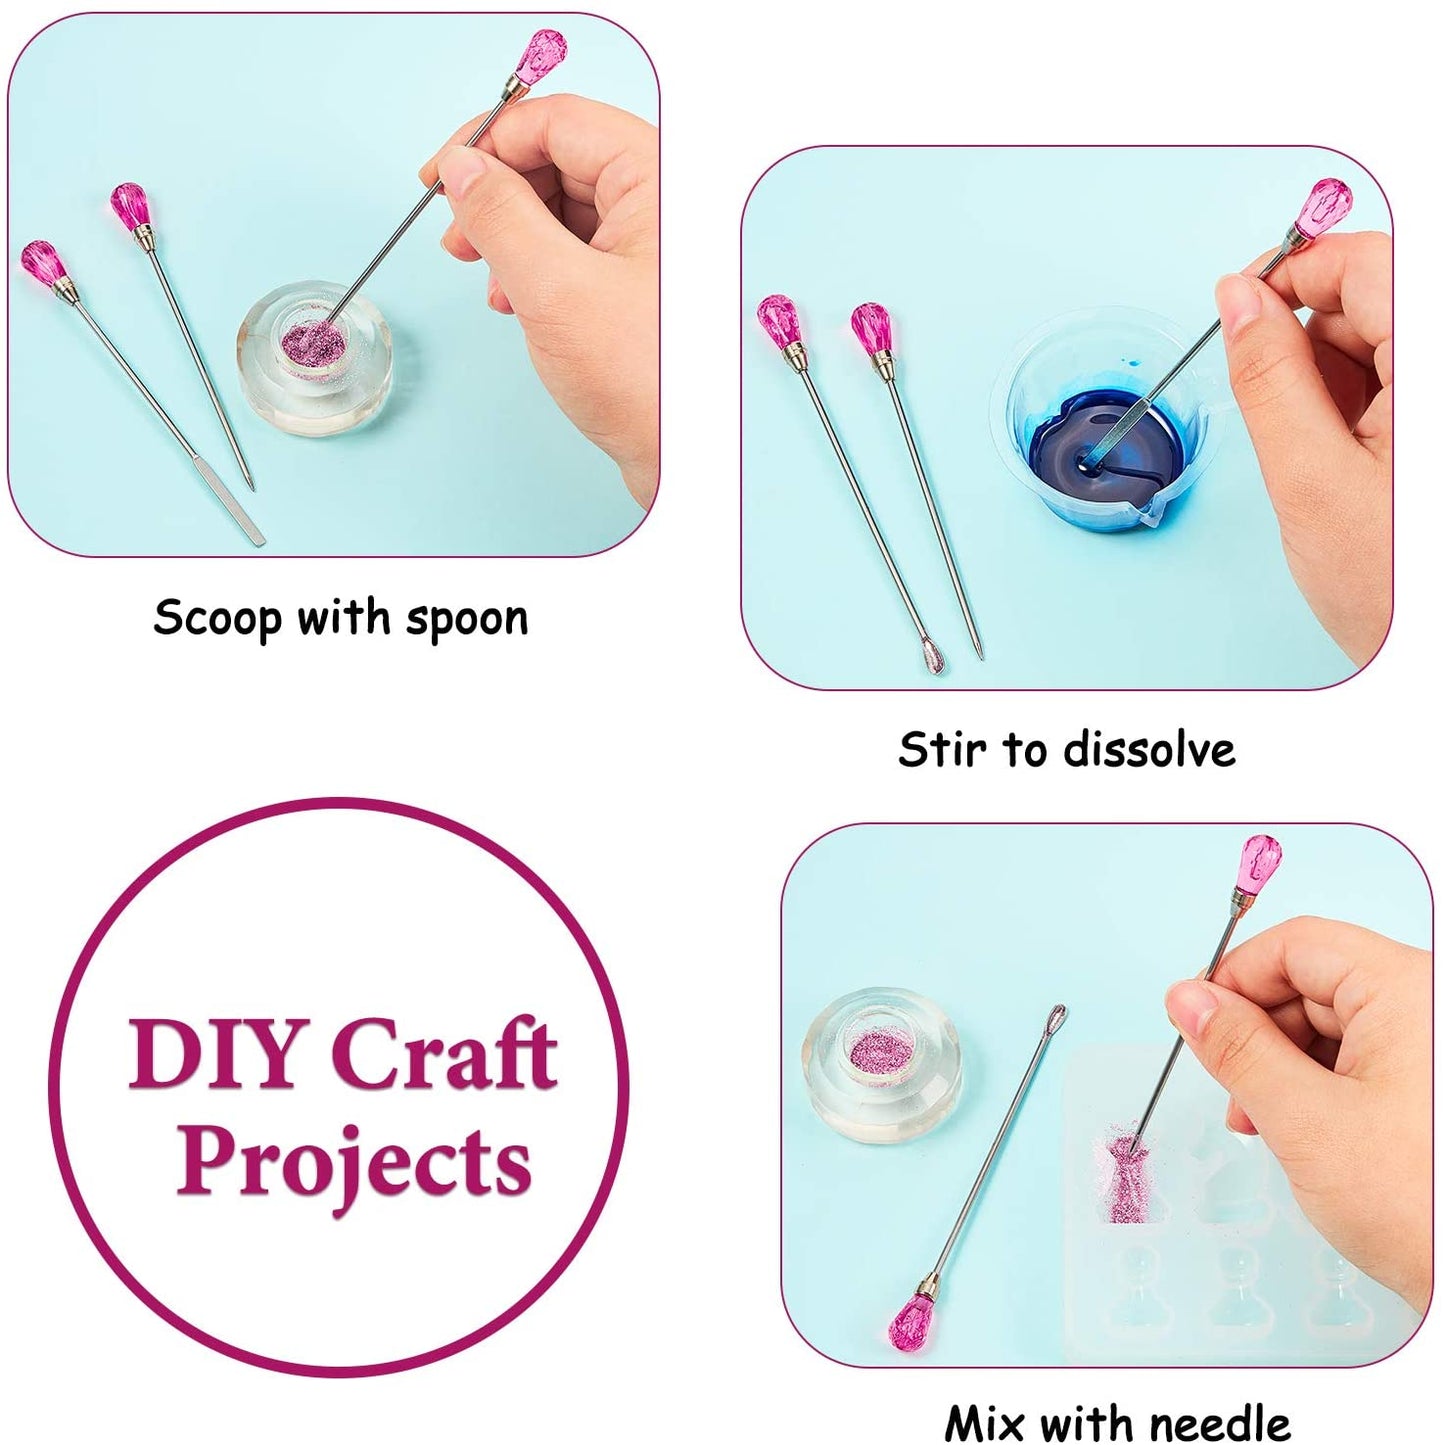 Resin Needle Spoon Tools Set Nail Art Tools for Silicone UV Epoxy Resin Mold Clay Craft DIY